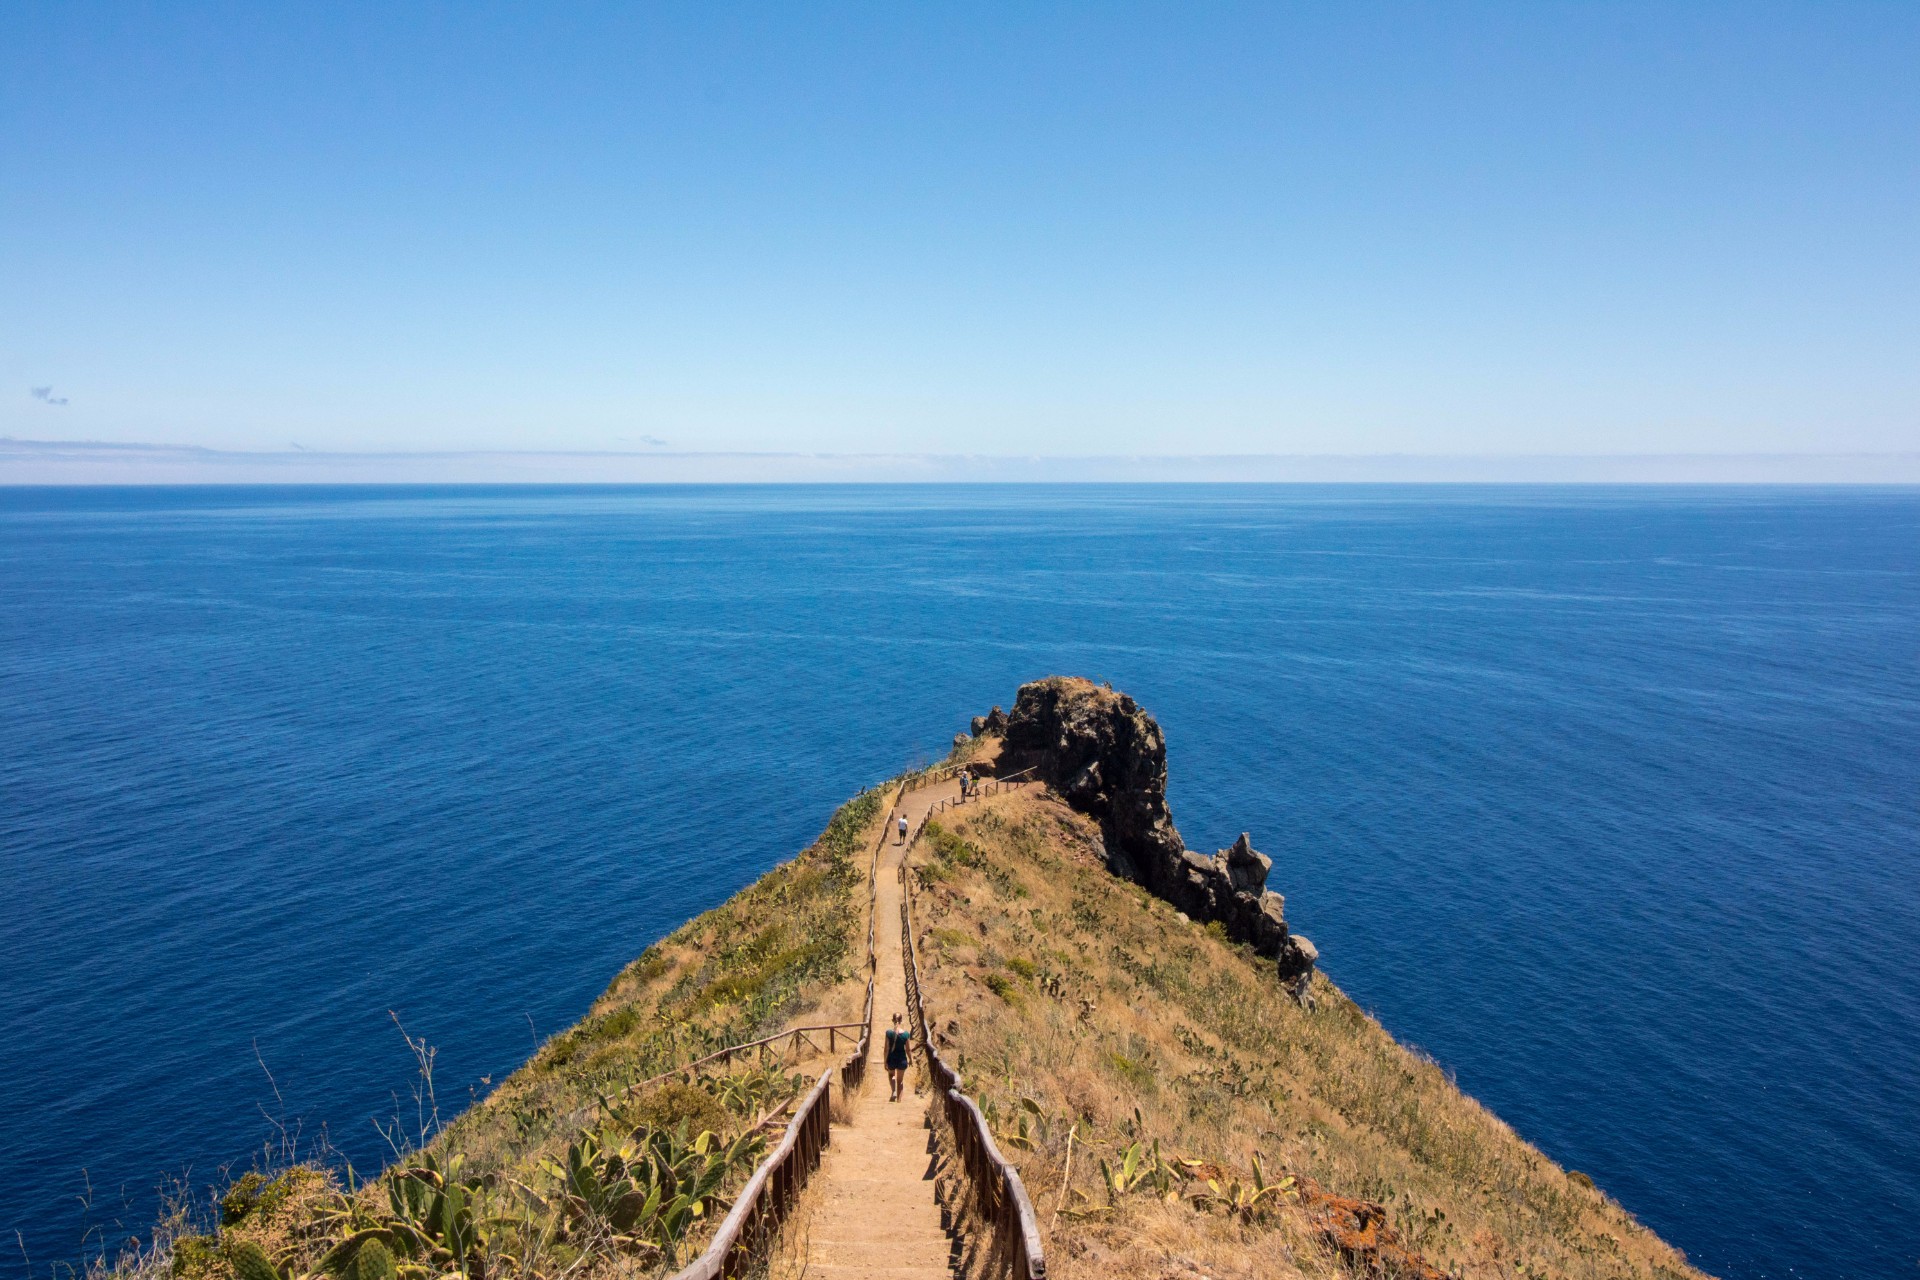 pathway-leading-out-to-blue-ocean-at-cristo-rei-viewpoint-madeira-itinerary-7-days